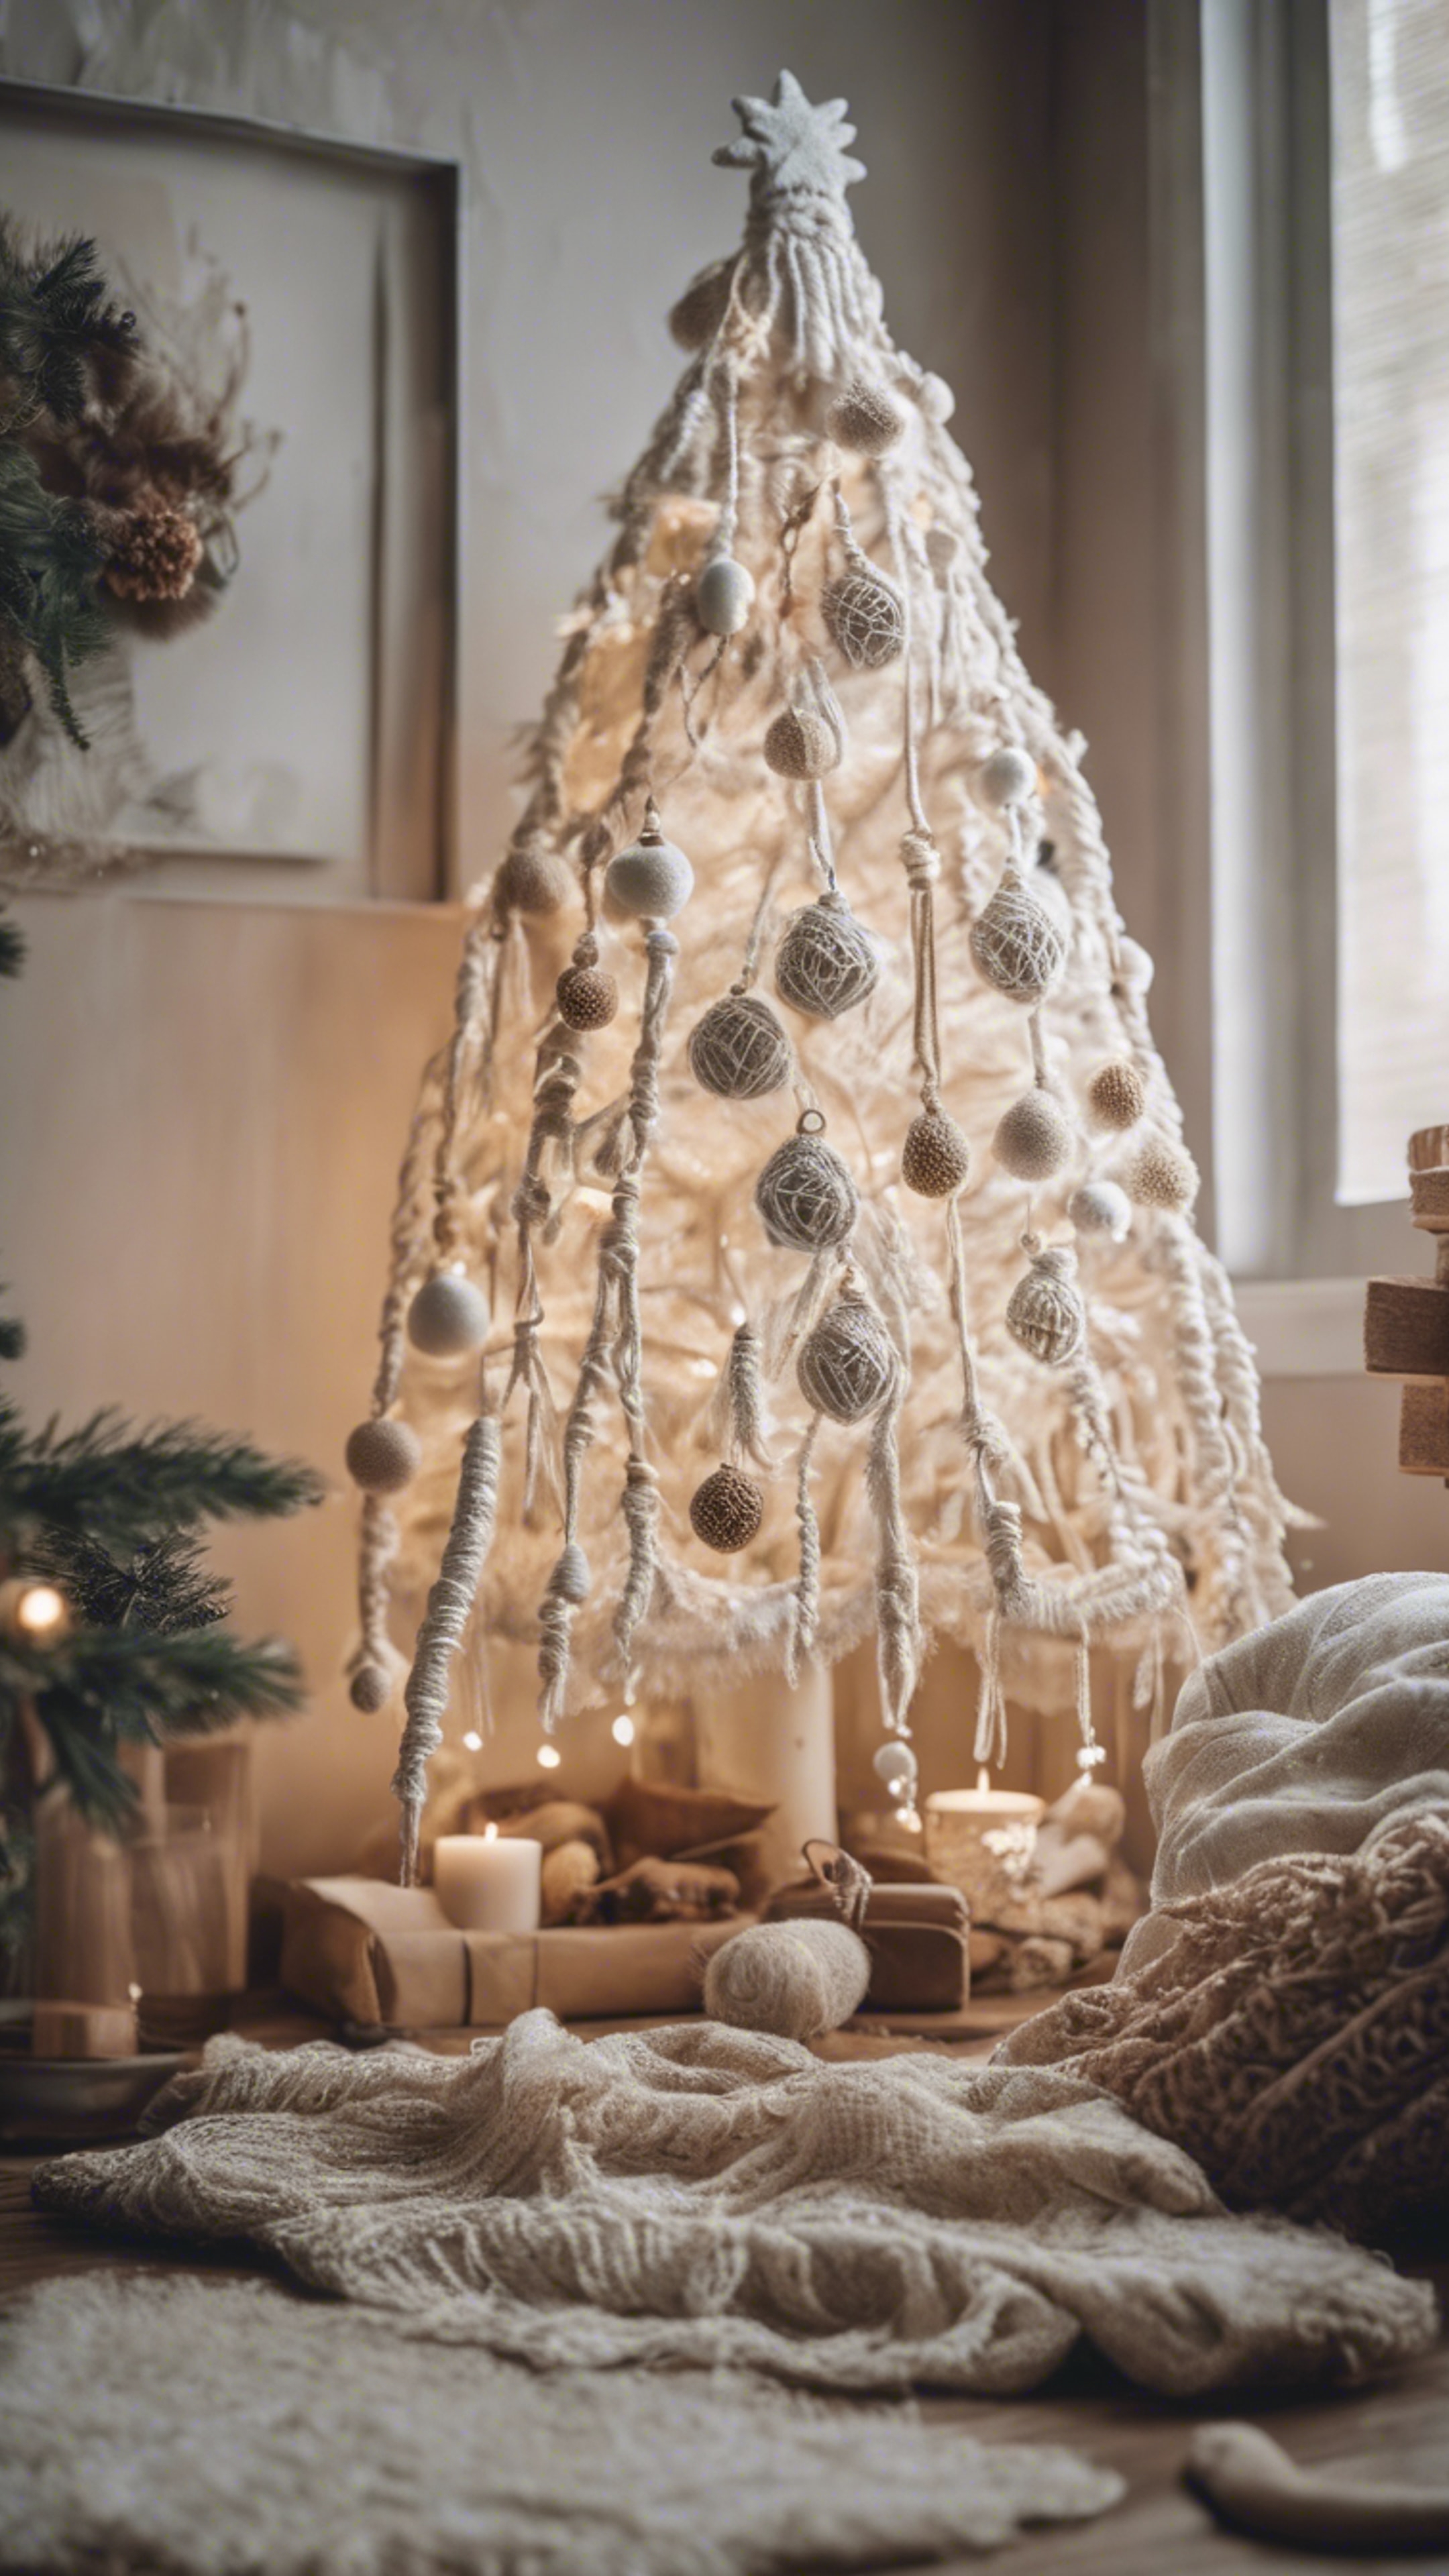 A white Christmas tree adorned with handmade macrame decorations in a boho-inspired room. Обои[c062b7b22ca84faf9af8]